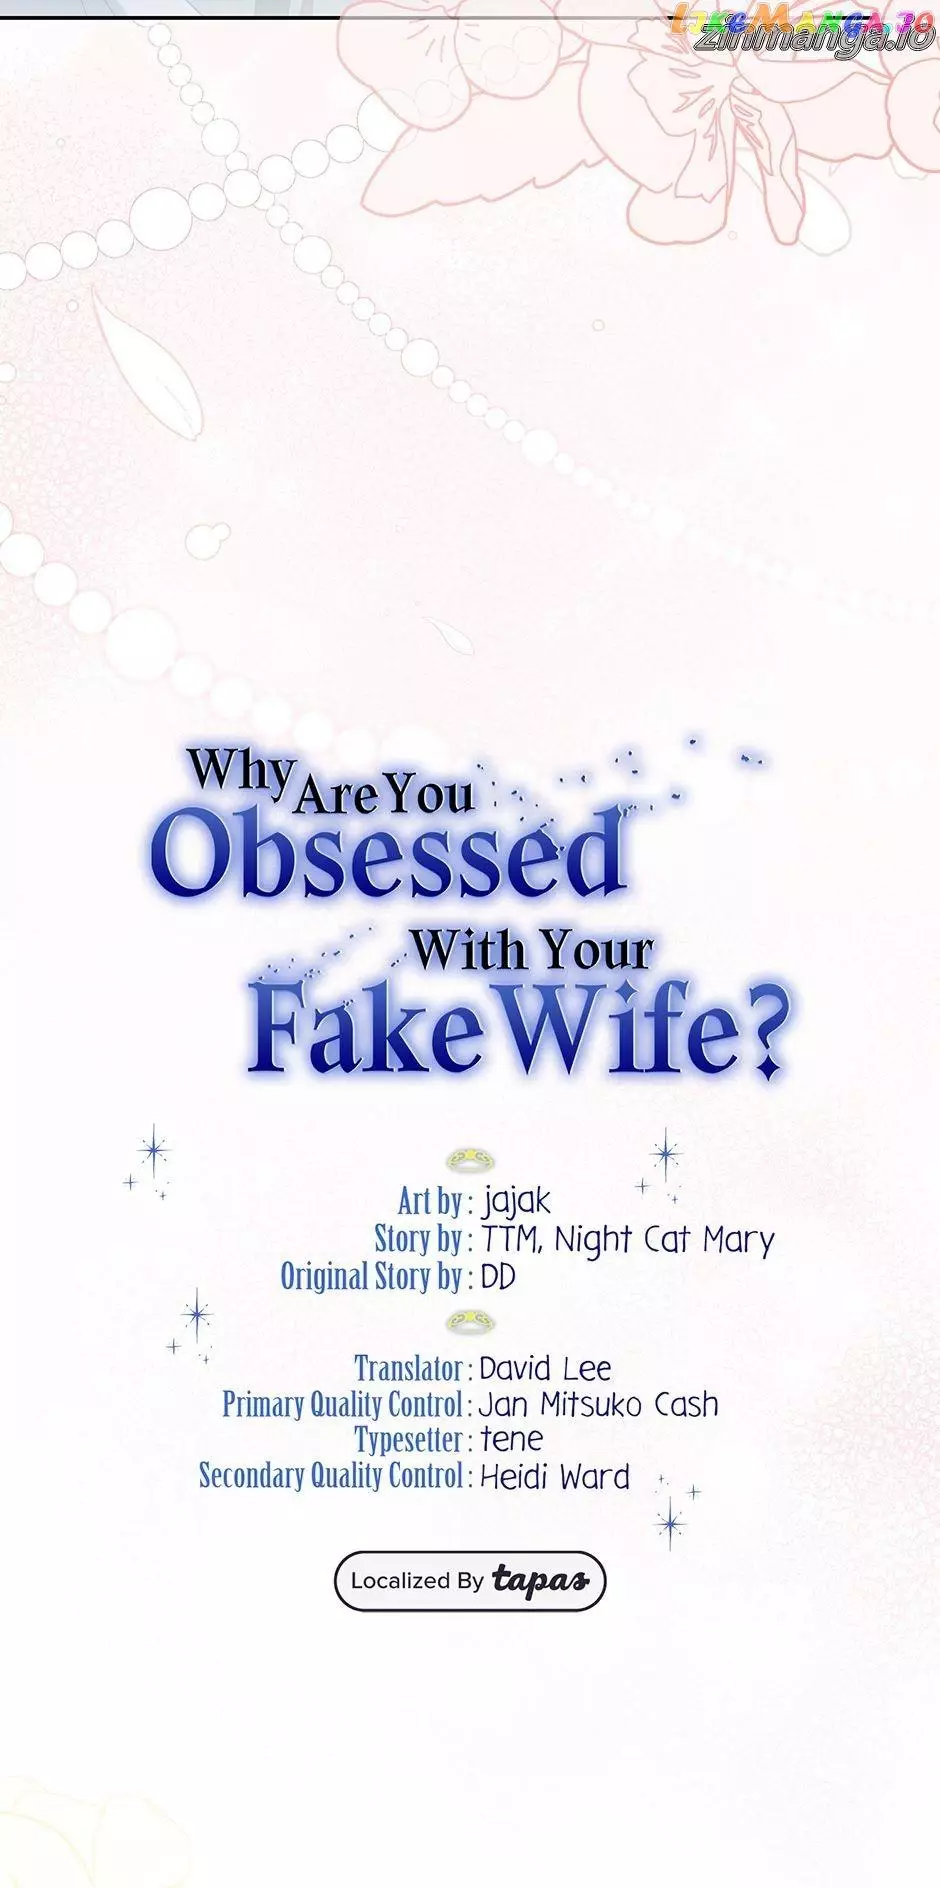 Why Are You Obsessed With Your Fake Wife? - 30 page 25-1008ff30